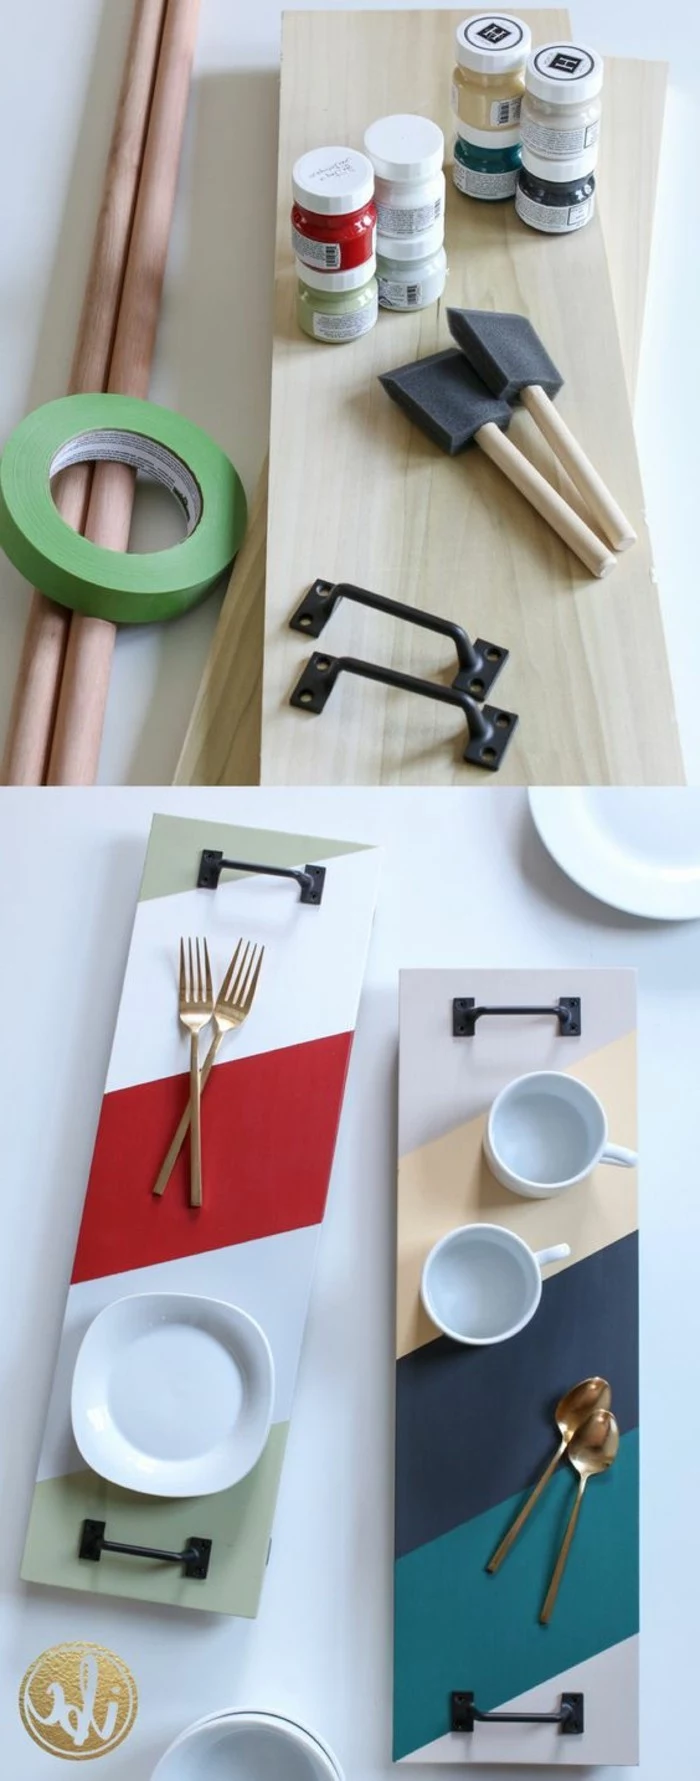 serving trays made from pieces of wood, with black metal handles, and multicolored stripes of paint, cute gift ideas, images showing the needed materials